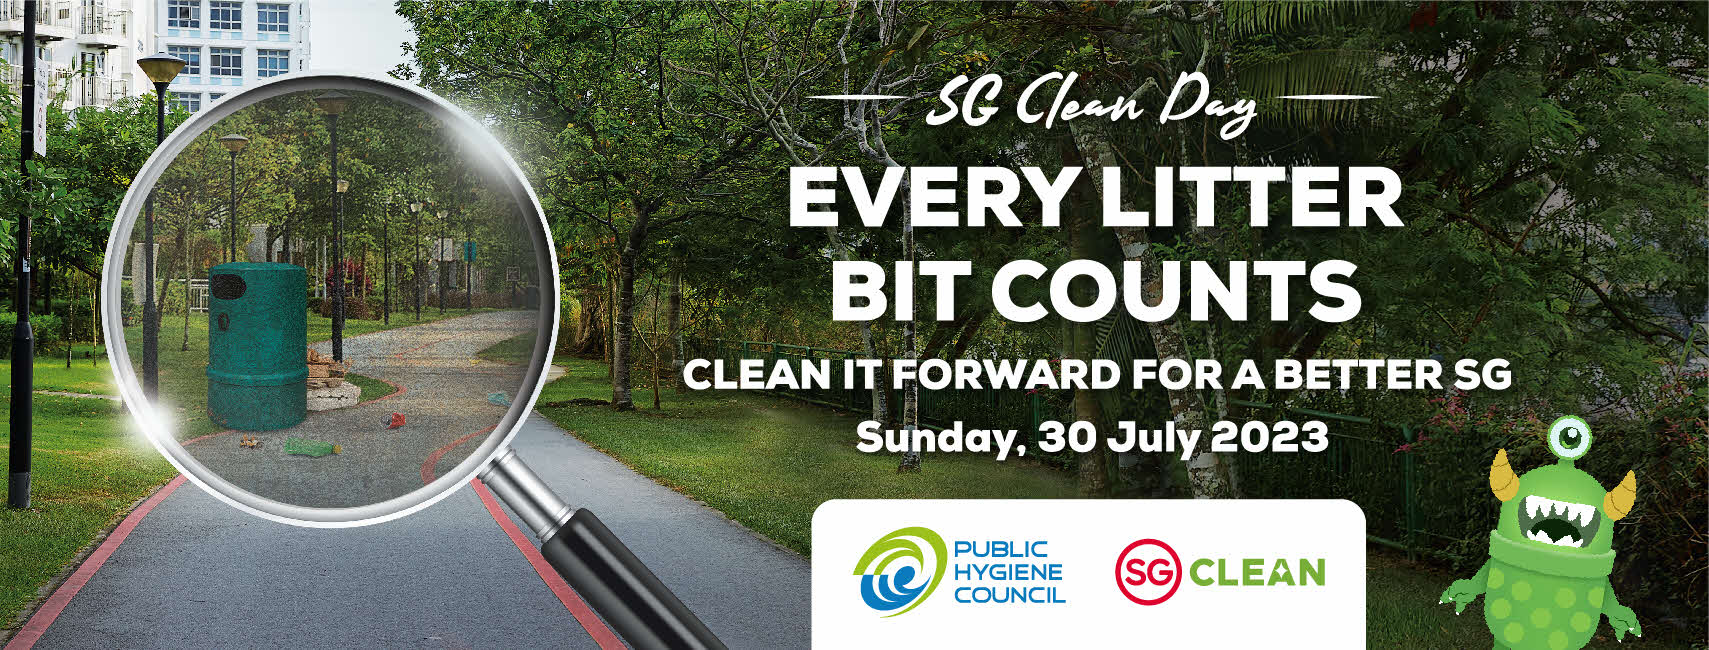 NEA SG Clean Day_FB Cover_30 July